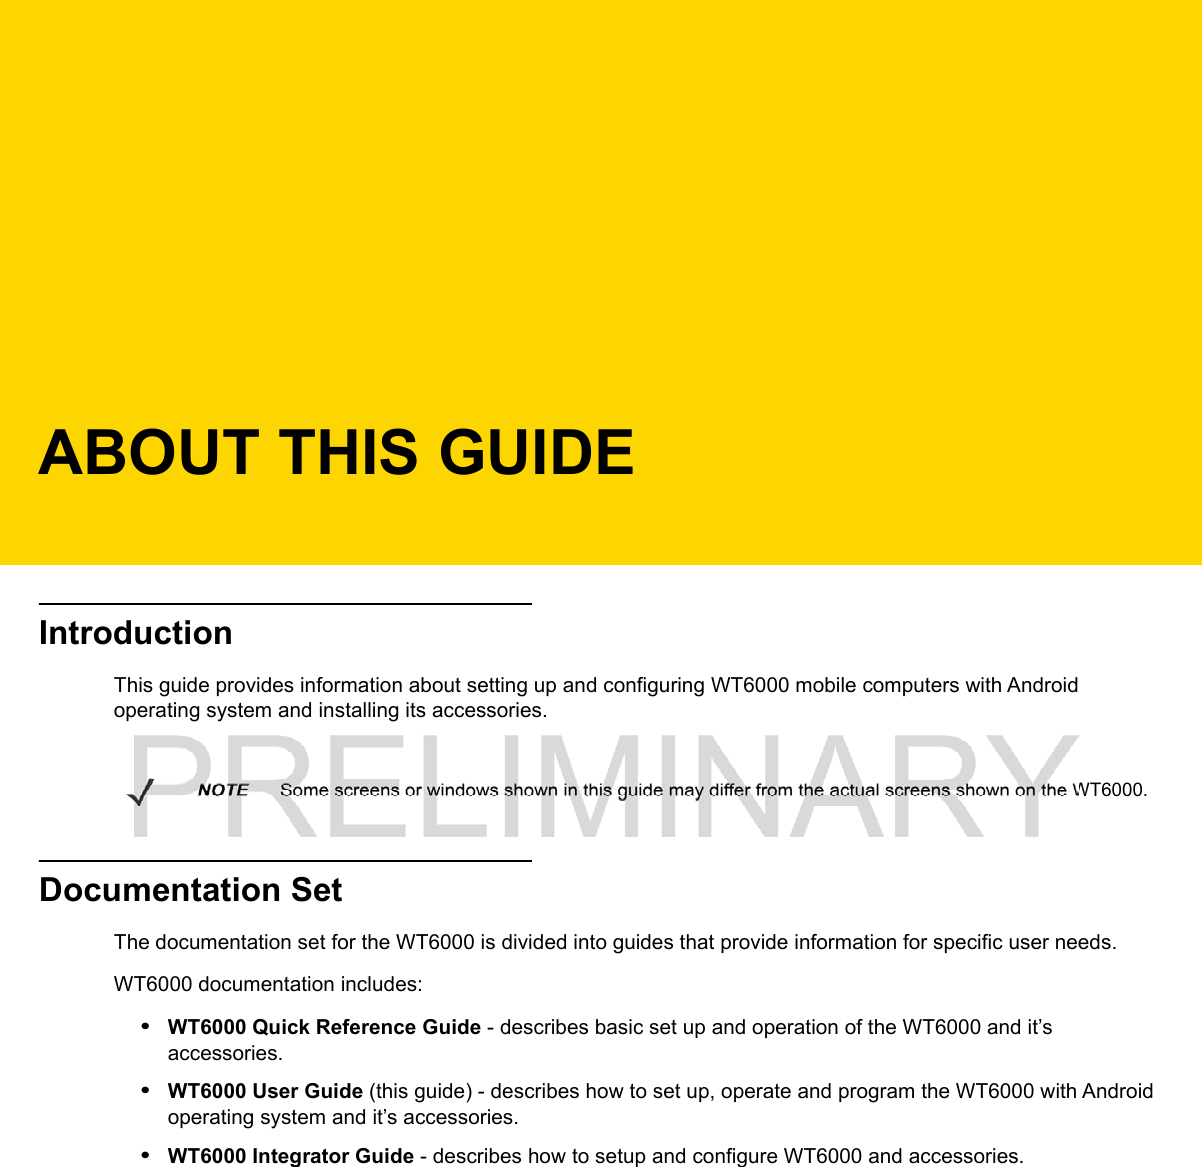 ABOUT THIS GUIDEIntroductionThis guide provides information about setting up and configuring WT6000 mobile computers with Android operating system and installing its accessories.Documentation SetThe documentation set for the WT6000 is divided into guides that provide information for specific user needs.WT6000 documentation includes:•WT6000 Quick Reference Guide - describes basic set up and operation of the WT6000 and it’s accessories. •WT6000 User Guide (this guide) - describes how to set up, operate and program the WT6000 with Android operating system and it’s accessories.•WT6000 Integrator Guide - describes how to setup and configure WT6000 and accessories.NOTE     Some screens or windows shown in this guide may differ from the actual screens shown on the WT6000.